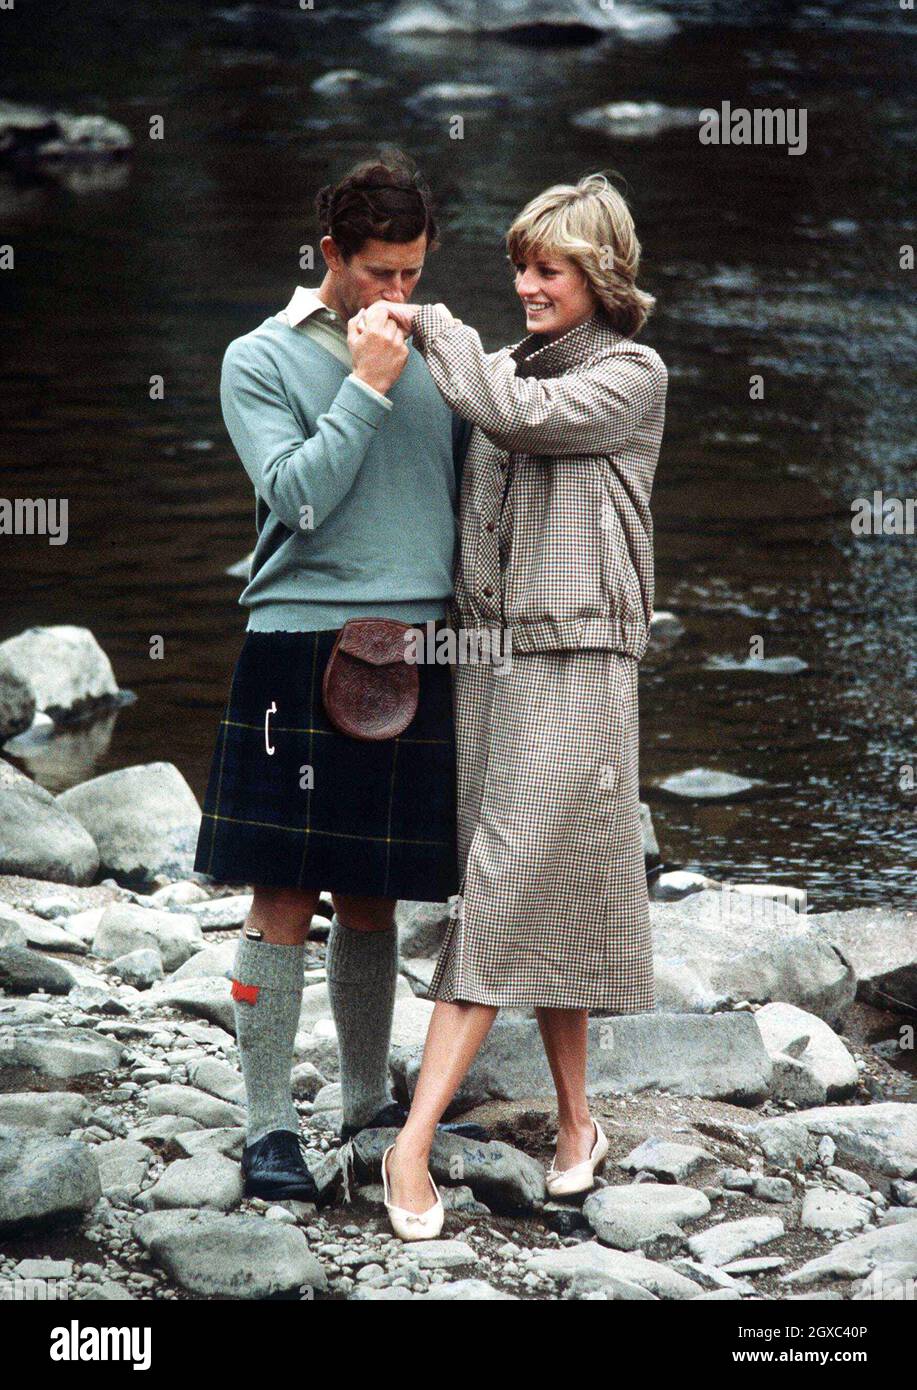 Prince Charles, Prince of Wales kisses Diana, Princess of Wales on the hand as they pose by the River Dee for the press on their honeymoon at Balmoral in Scotland in August 1981. Stock Photo